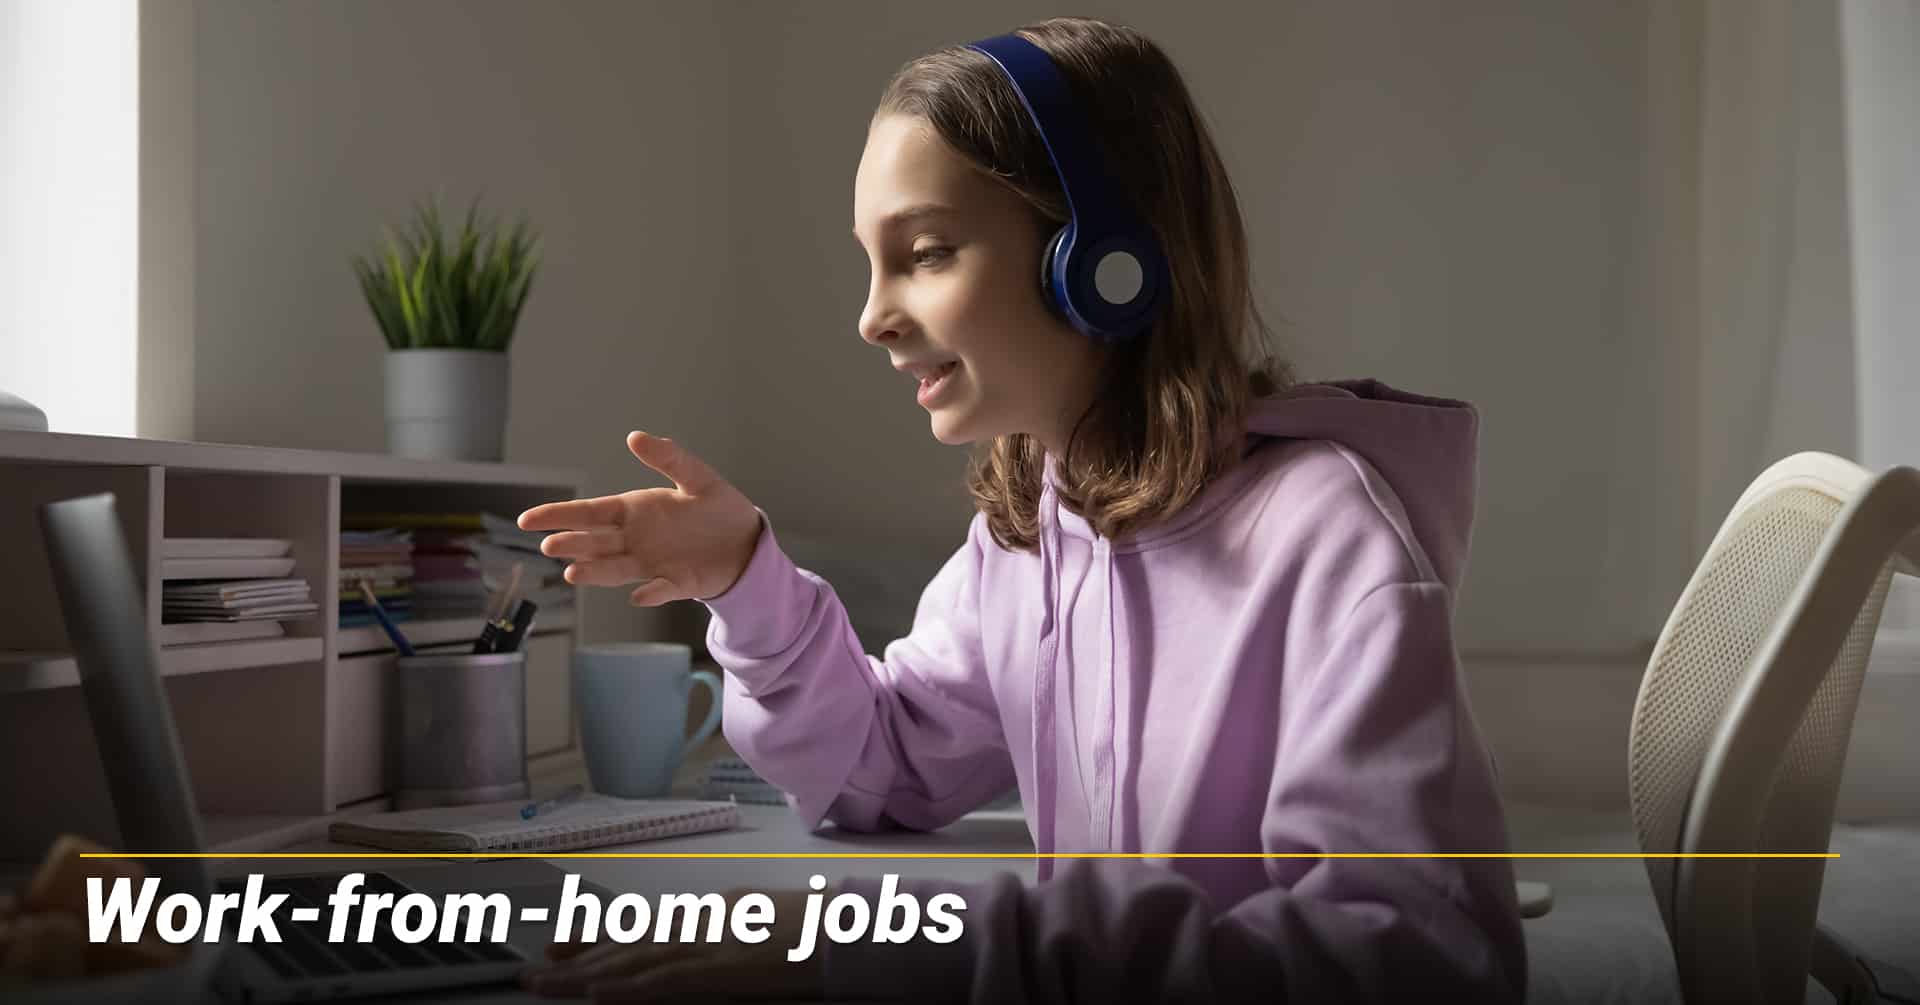 Work-from-home jobs